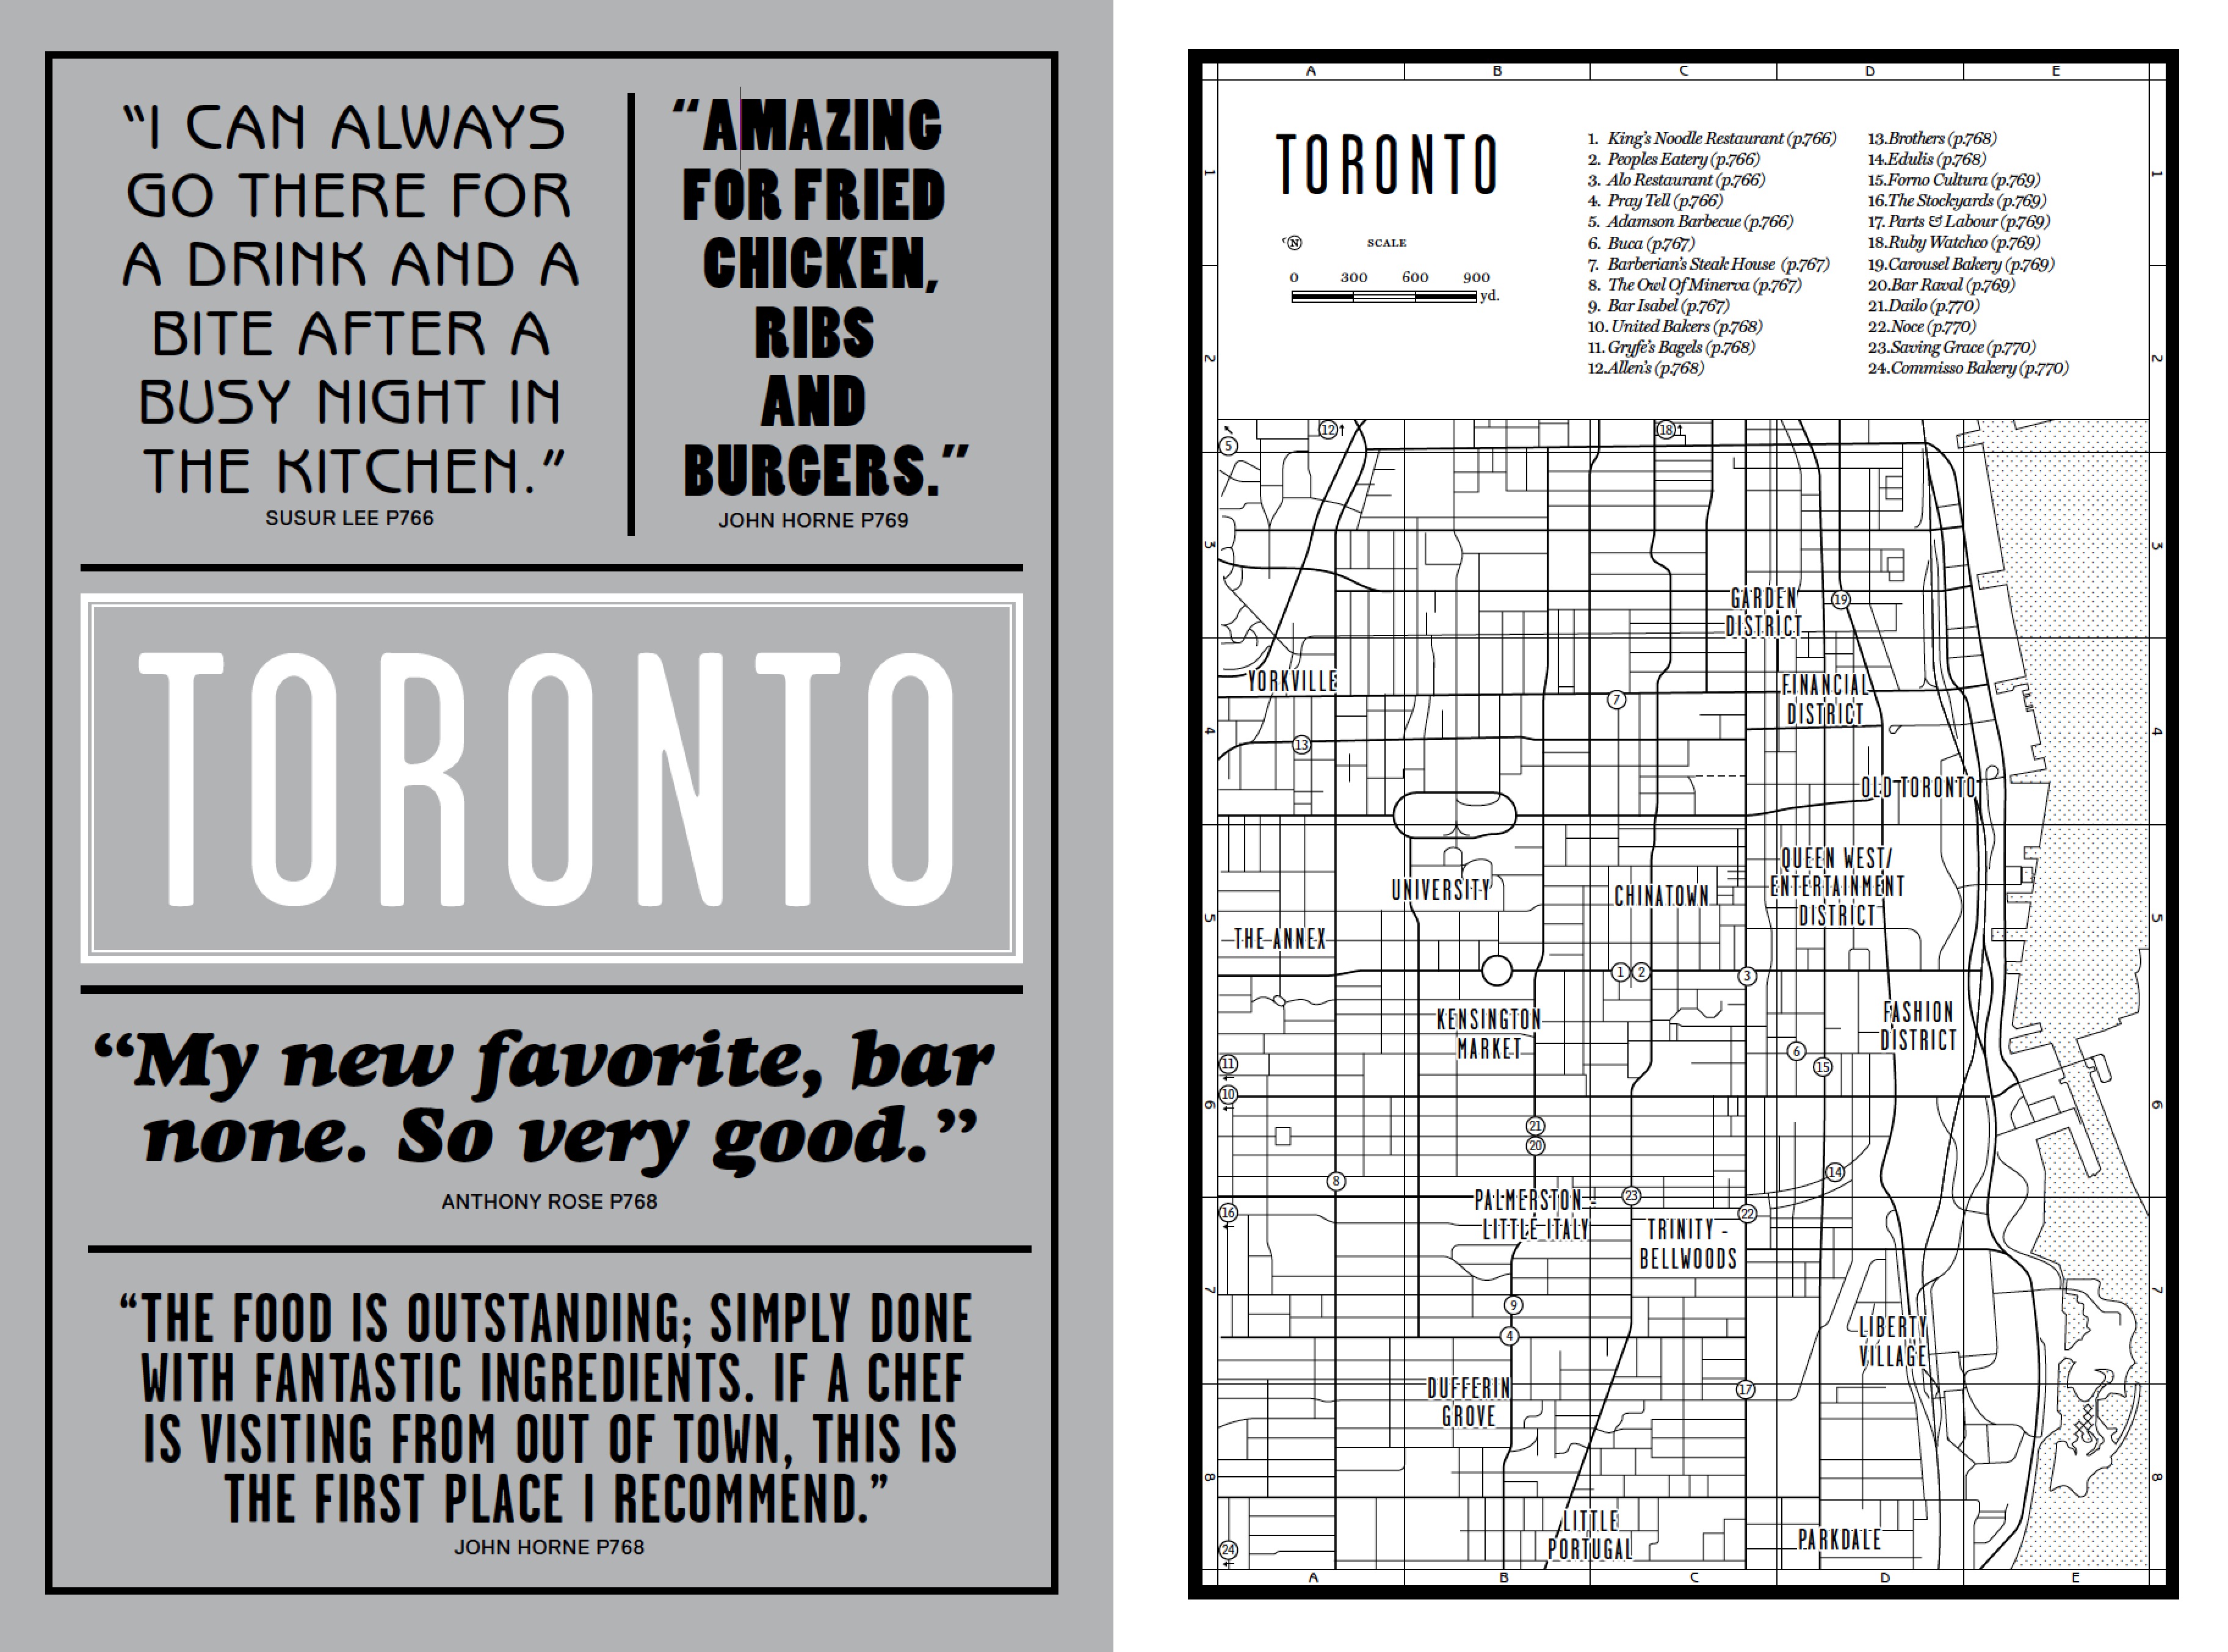 The Toronto introduction from our new book Where Chefs Eat